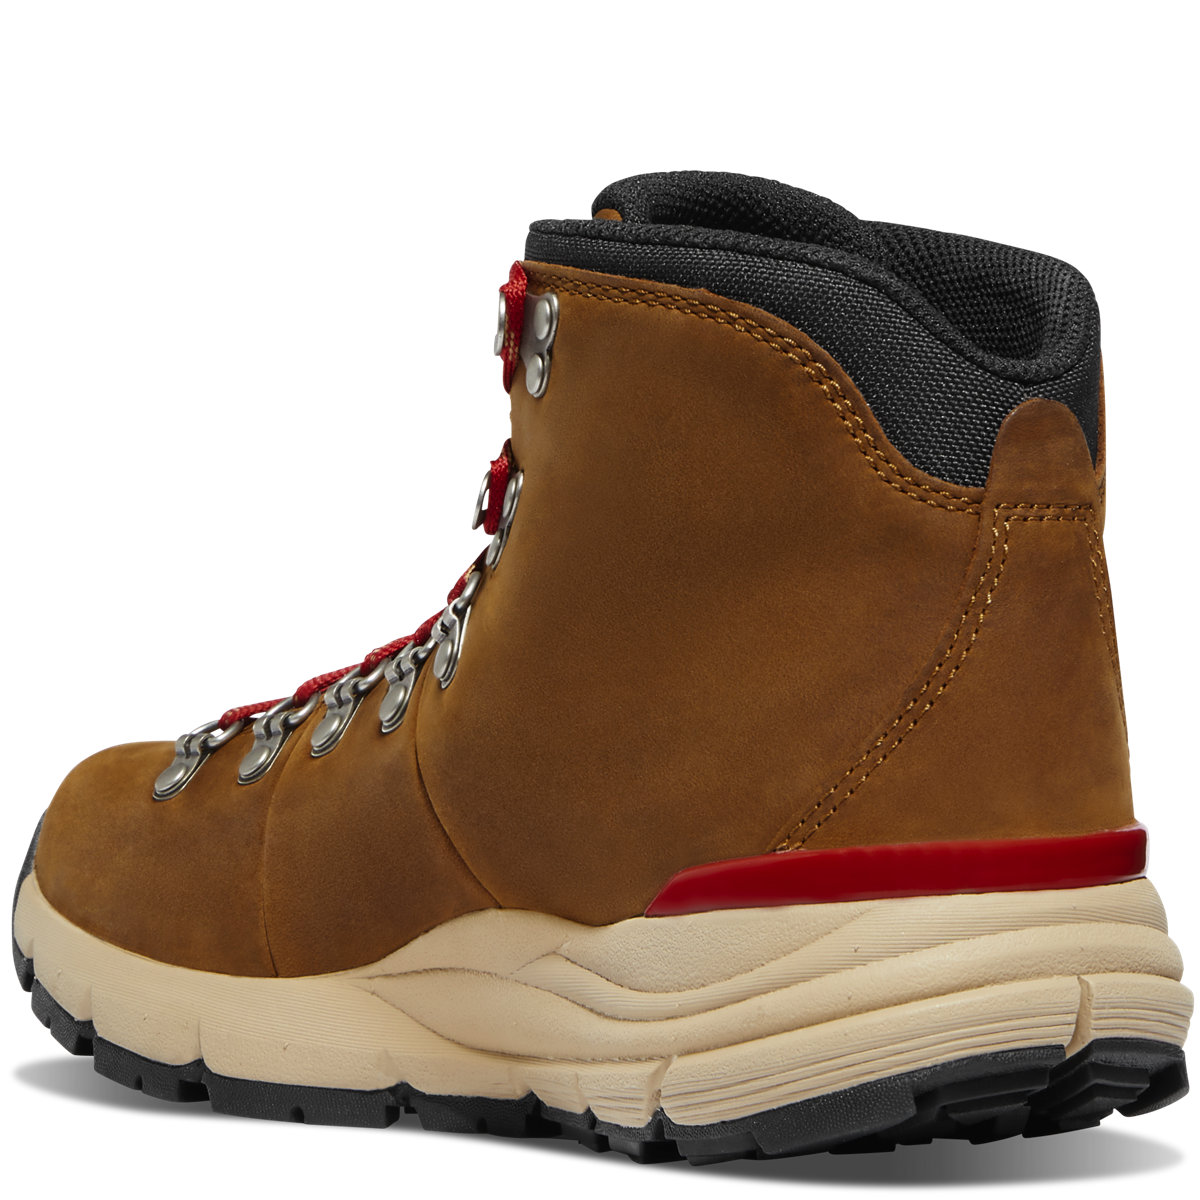 Women's Mountain 600 Leaf 4.5" Grizzly Brown/Rhodo Red GTX